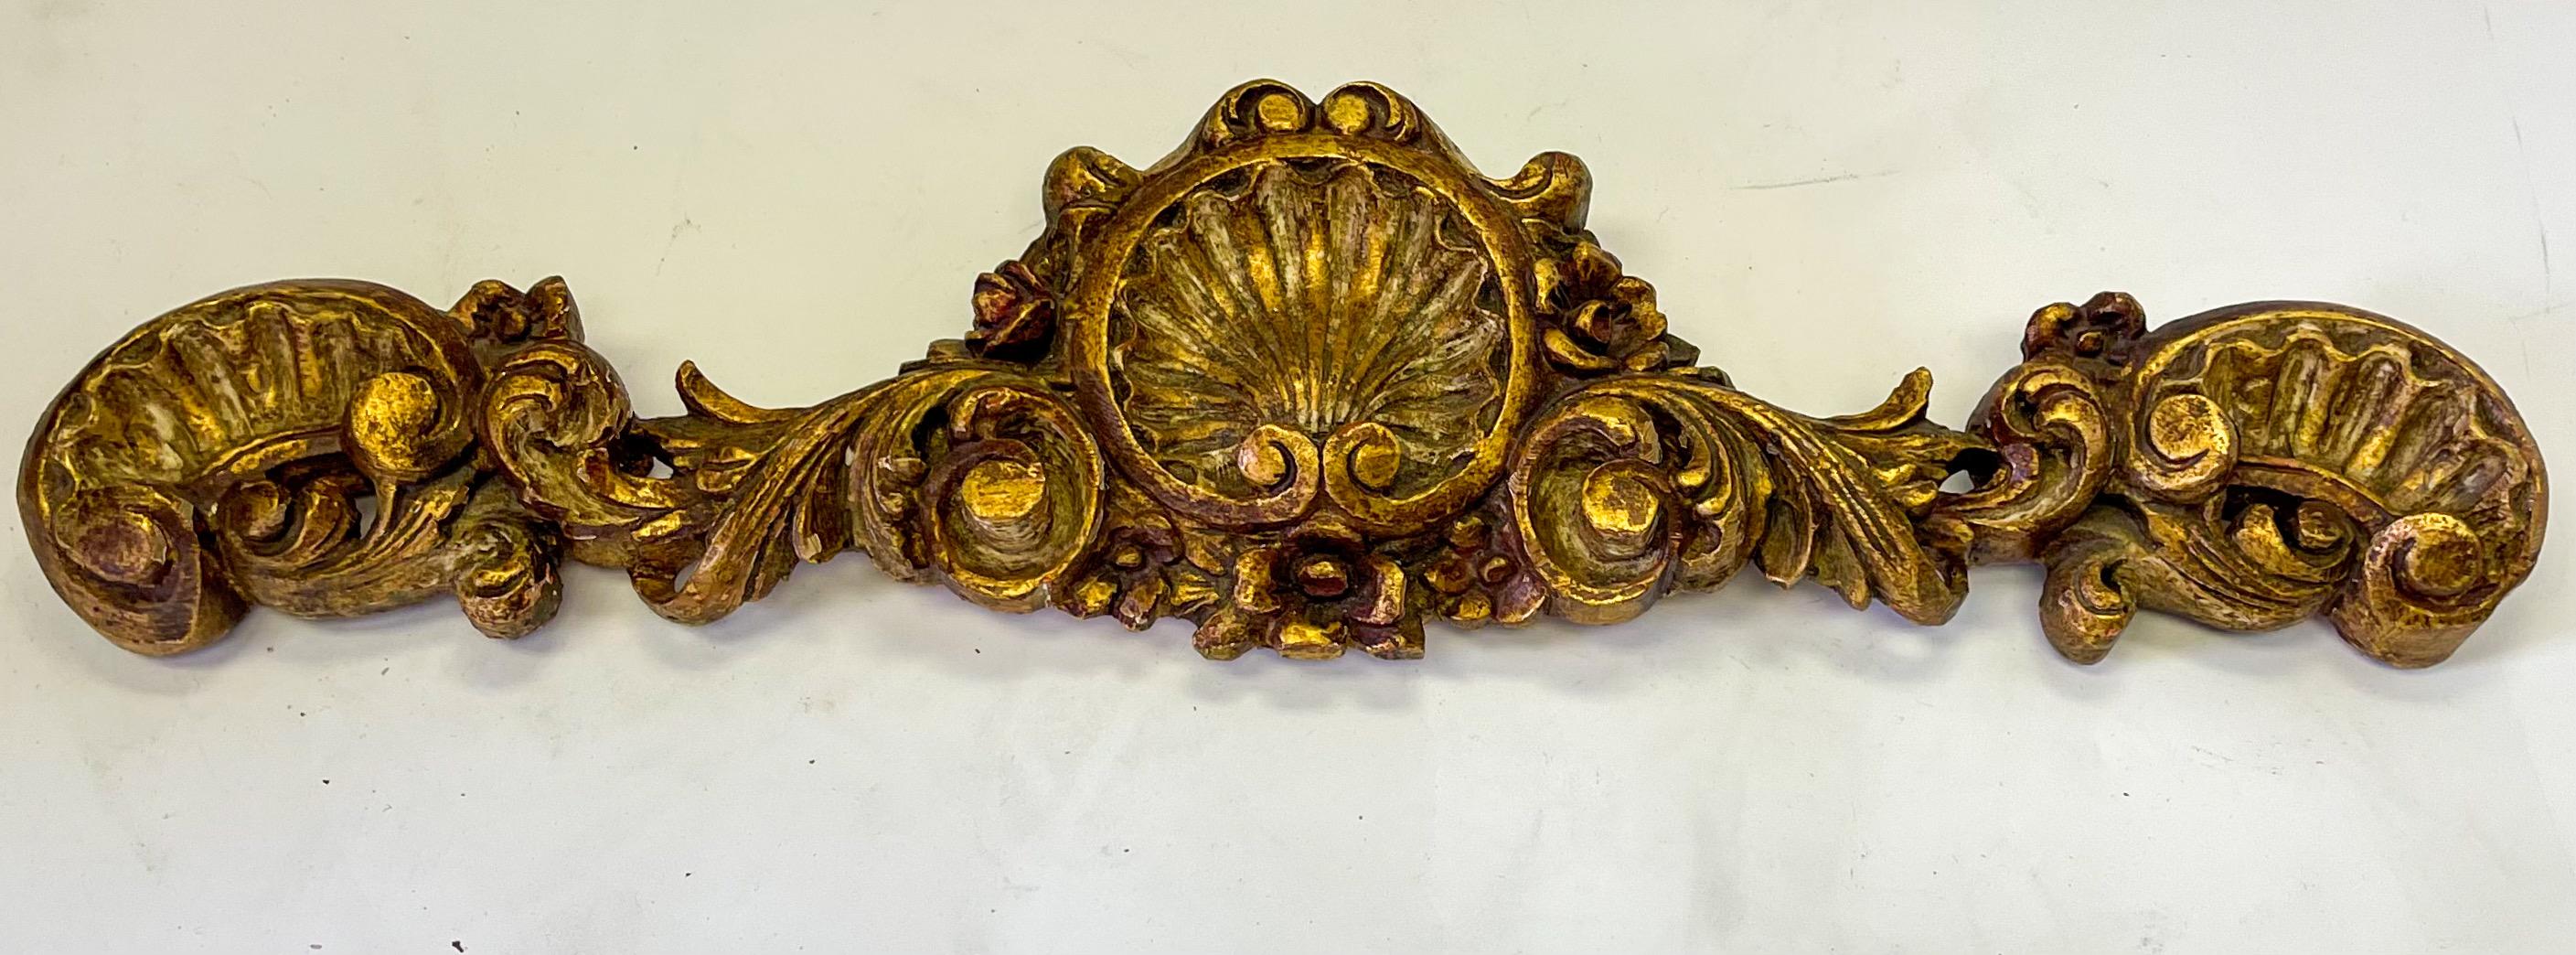 This is a pair of mid-century Rococo style carved giltwood Spanish valances or wall plaques. They are marked and in very good condition.